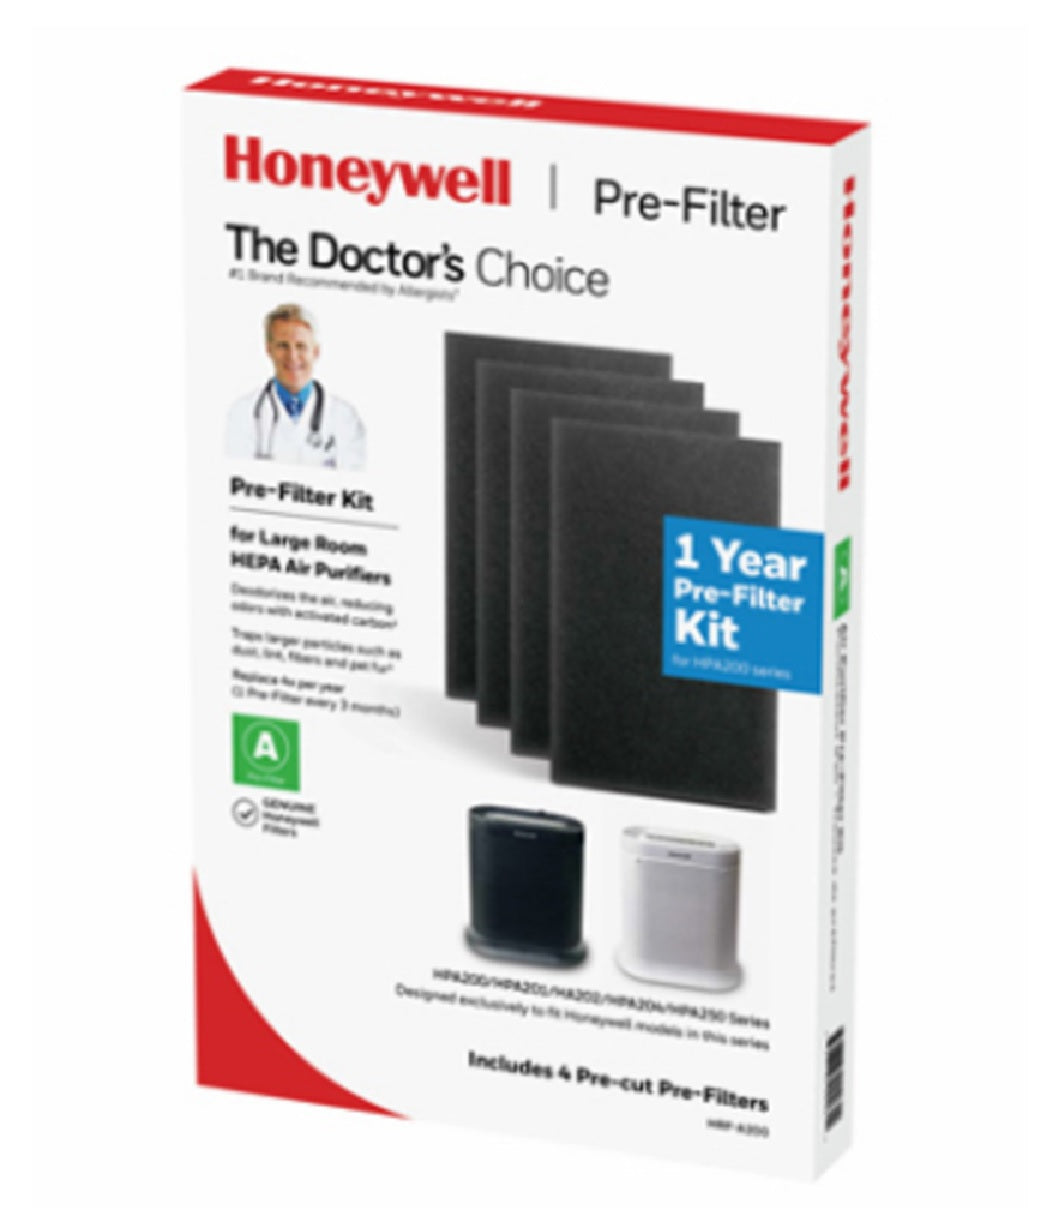 Honeywell HRF-A200 Pre-Cut Carbon Pre-Filter for HPA5200 & HPA200